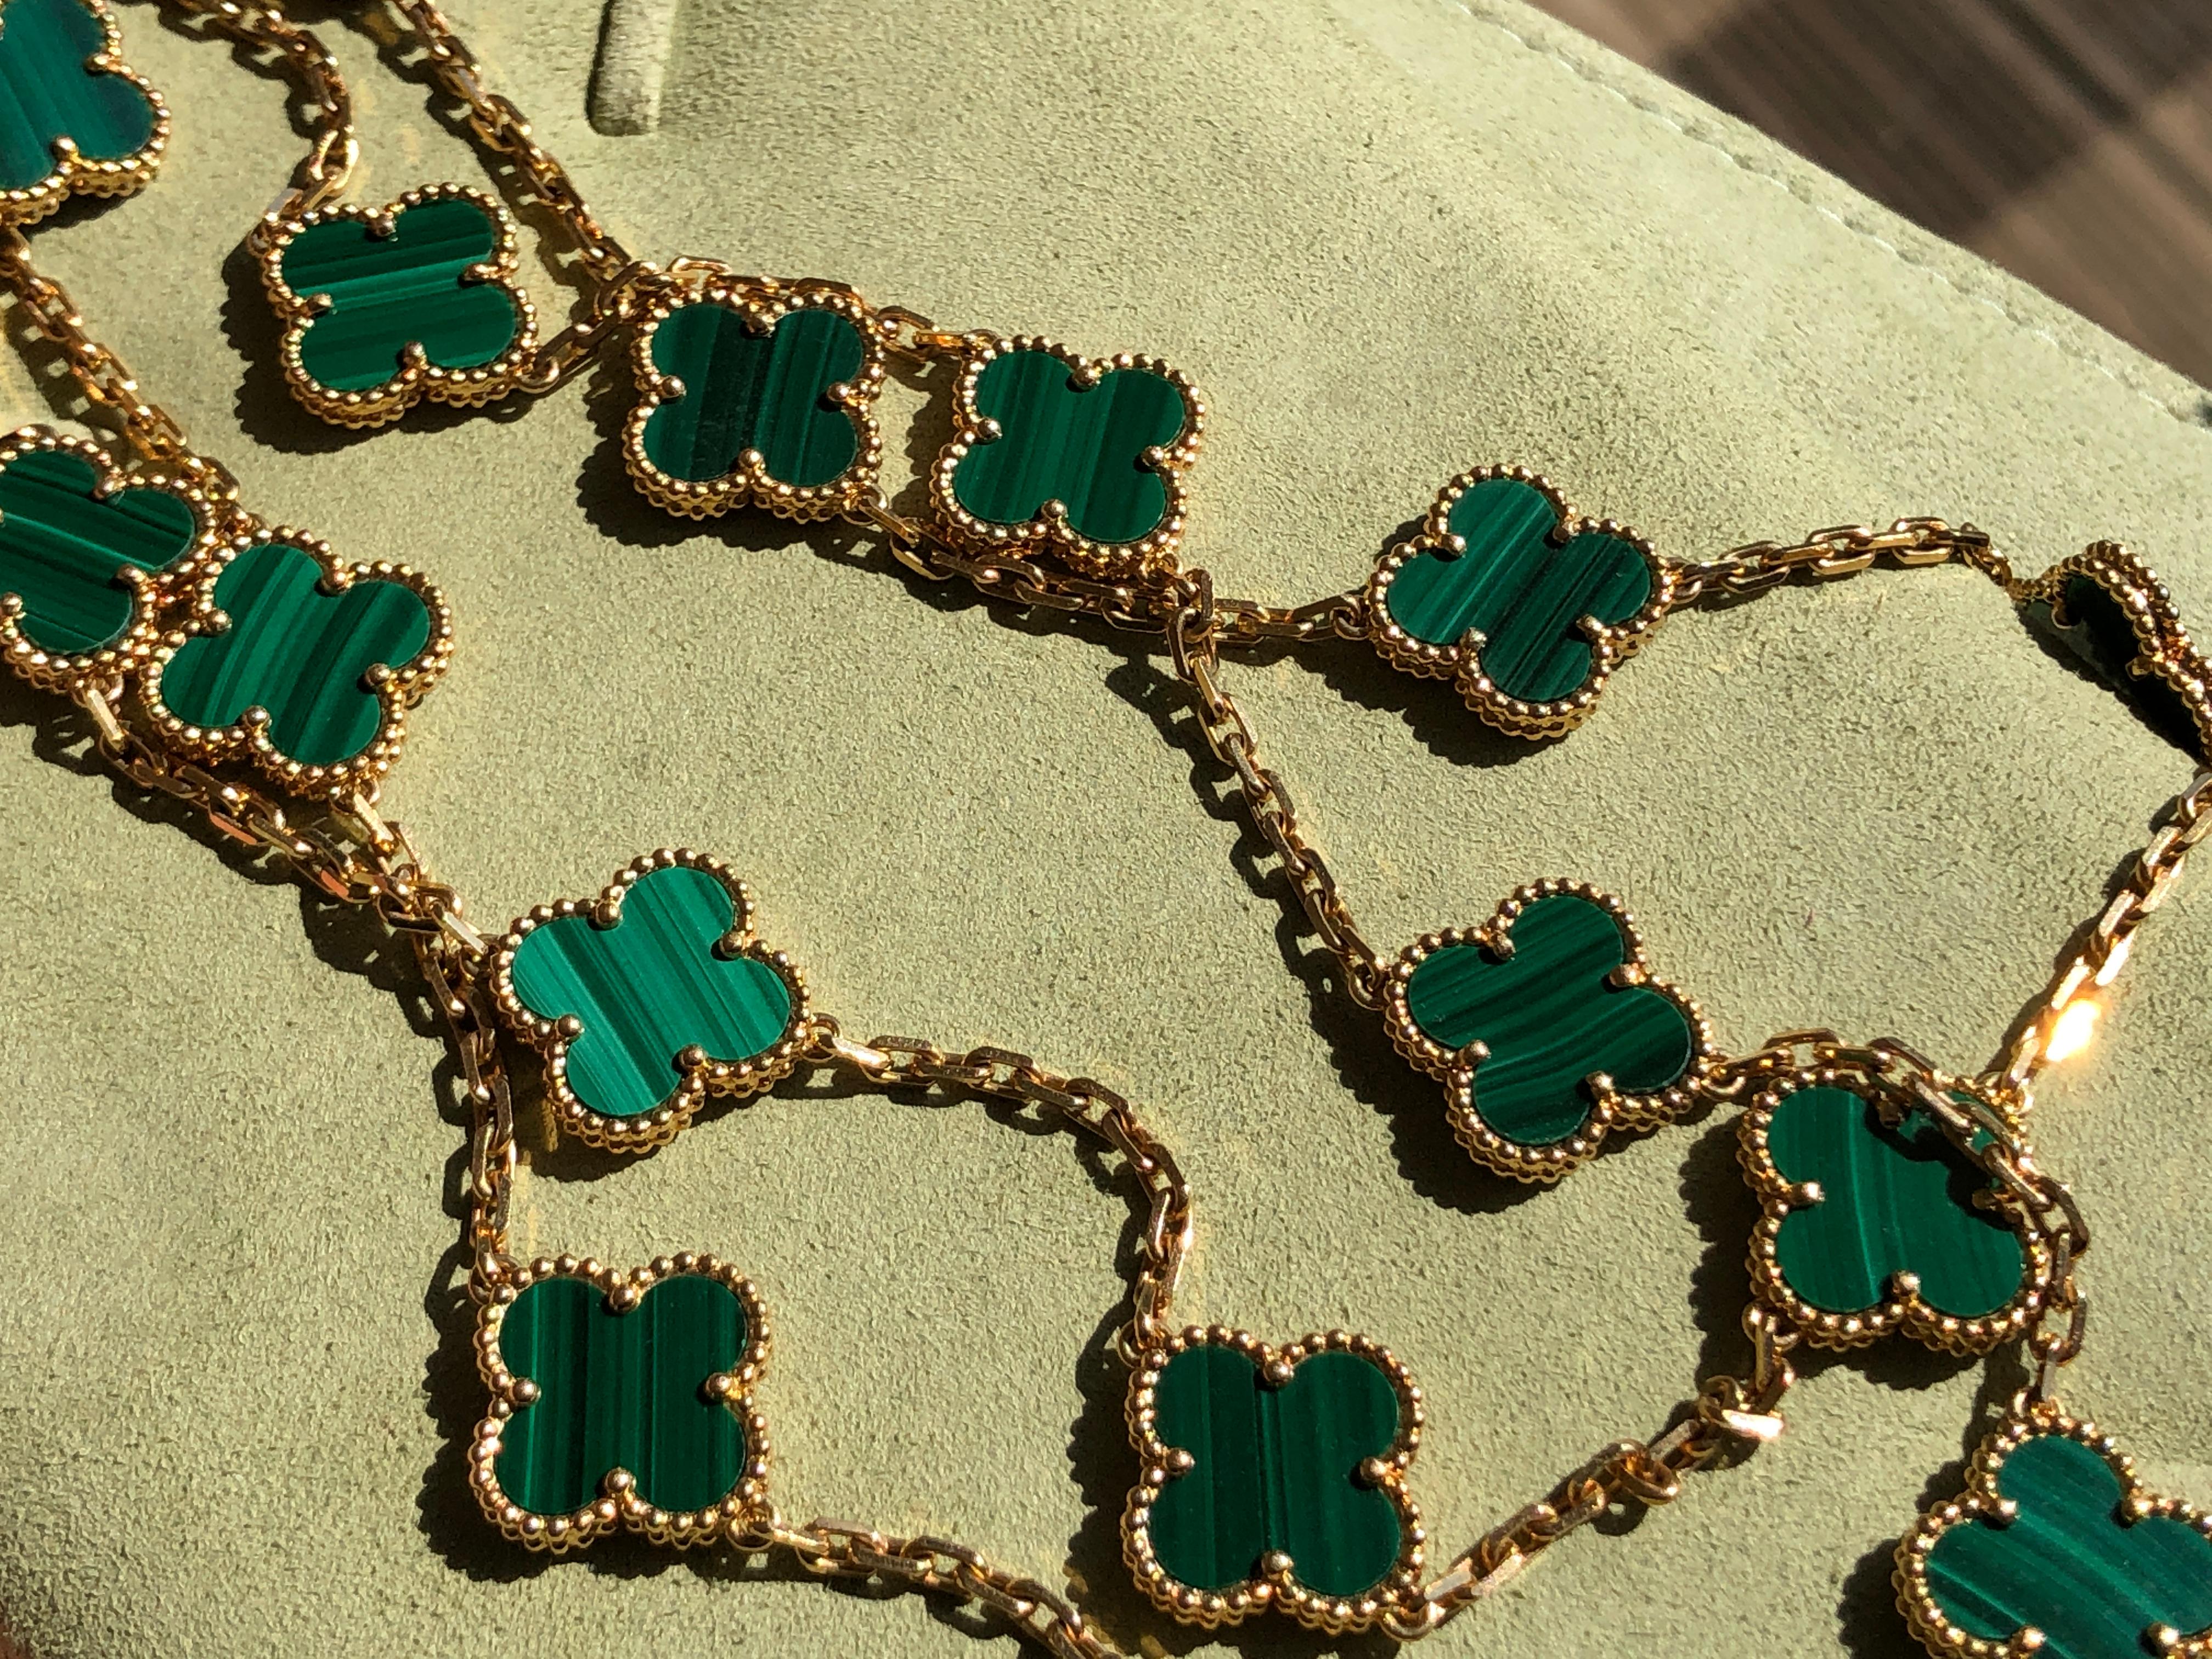 18k Yellow Gold Alhambra 20 Motifs Malachite Necklace by Van Cleef & Arpels was made in 2014. With 20 motifs of Malachite Alhambra stones 15mm each. 

This necklace comes with VCA original pouch. Retail Price: £15000

Every piece we sell is 100%